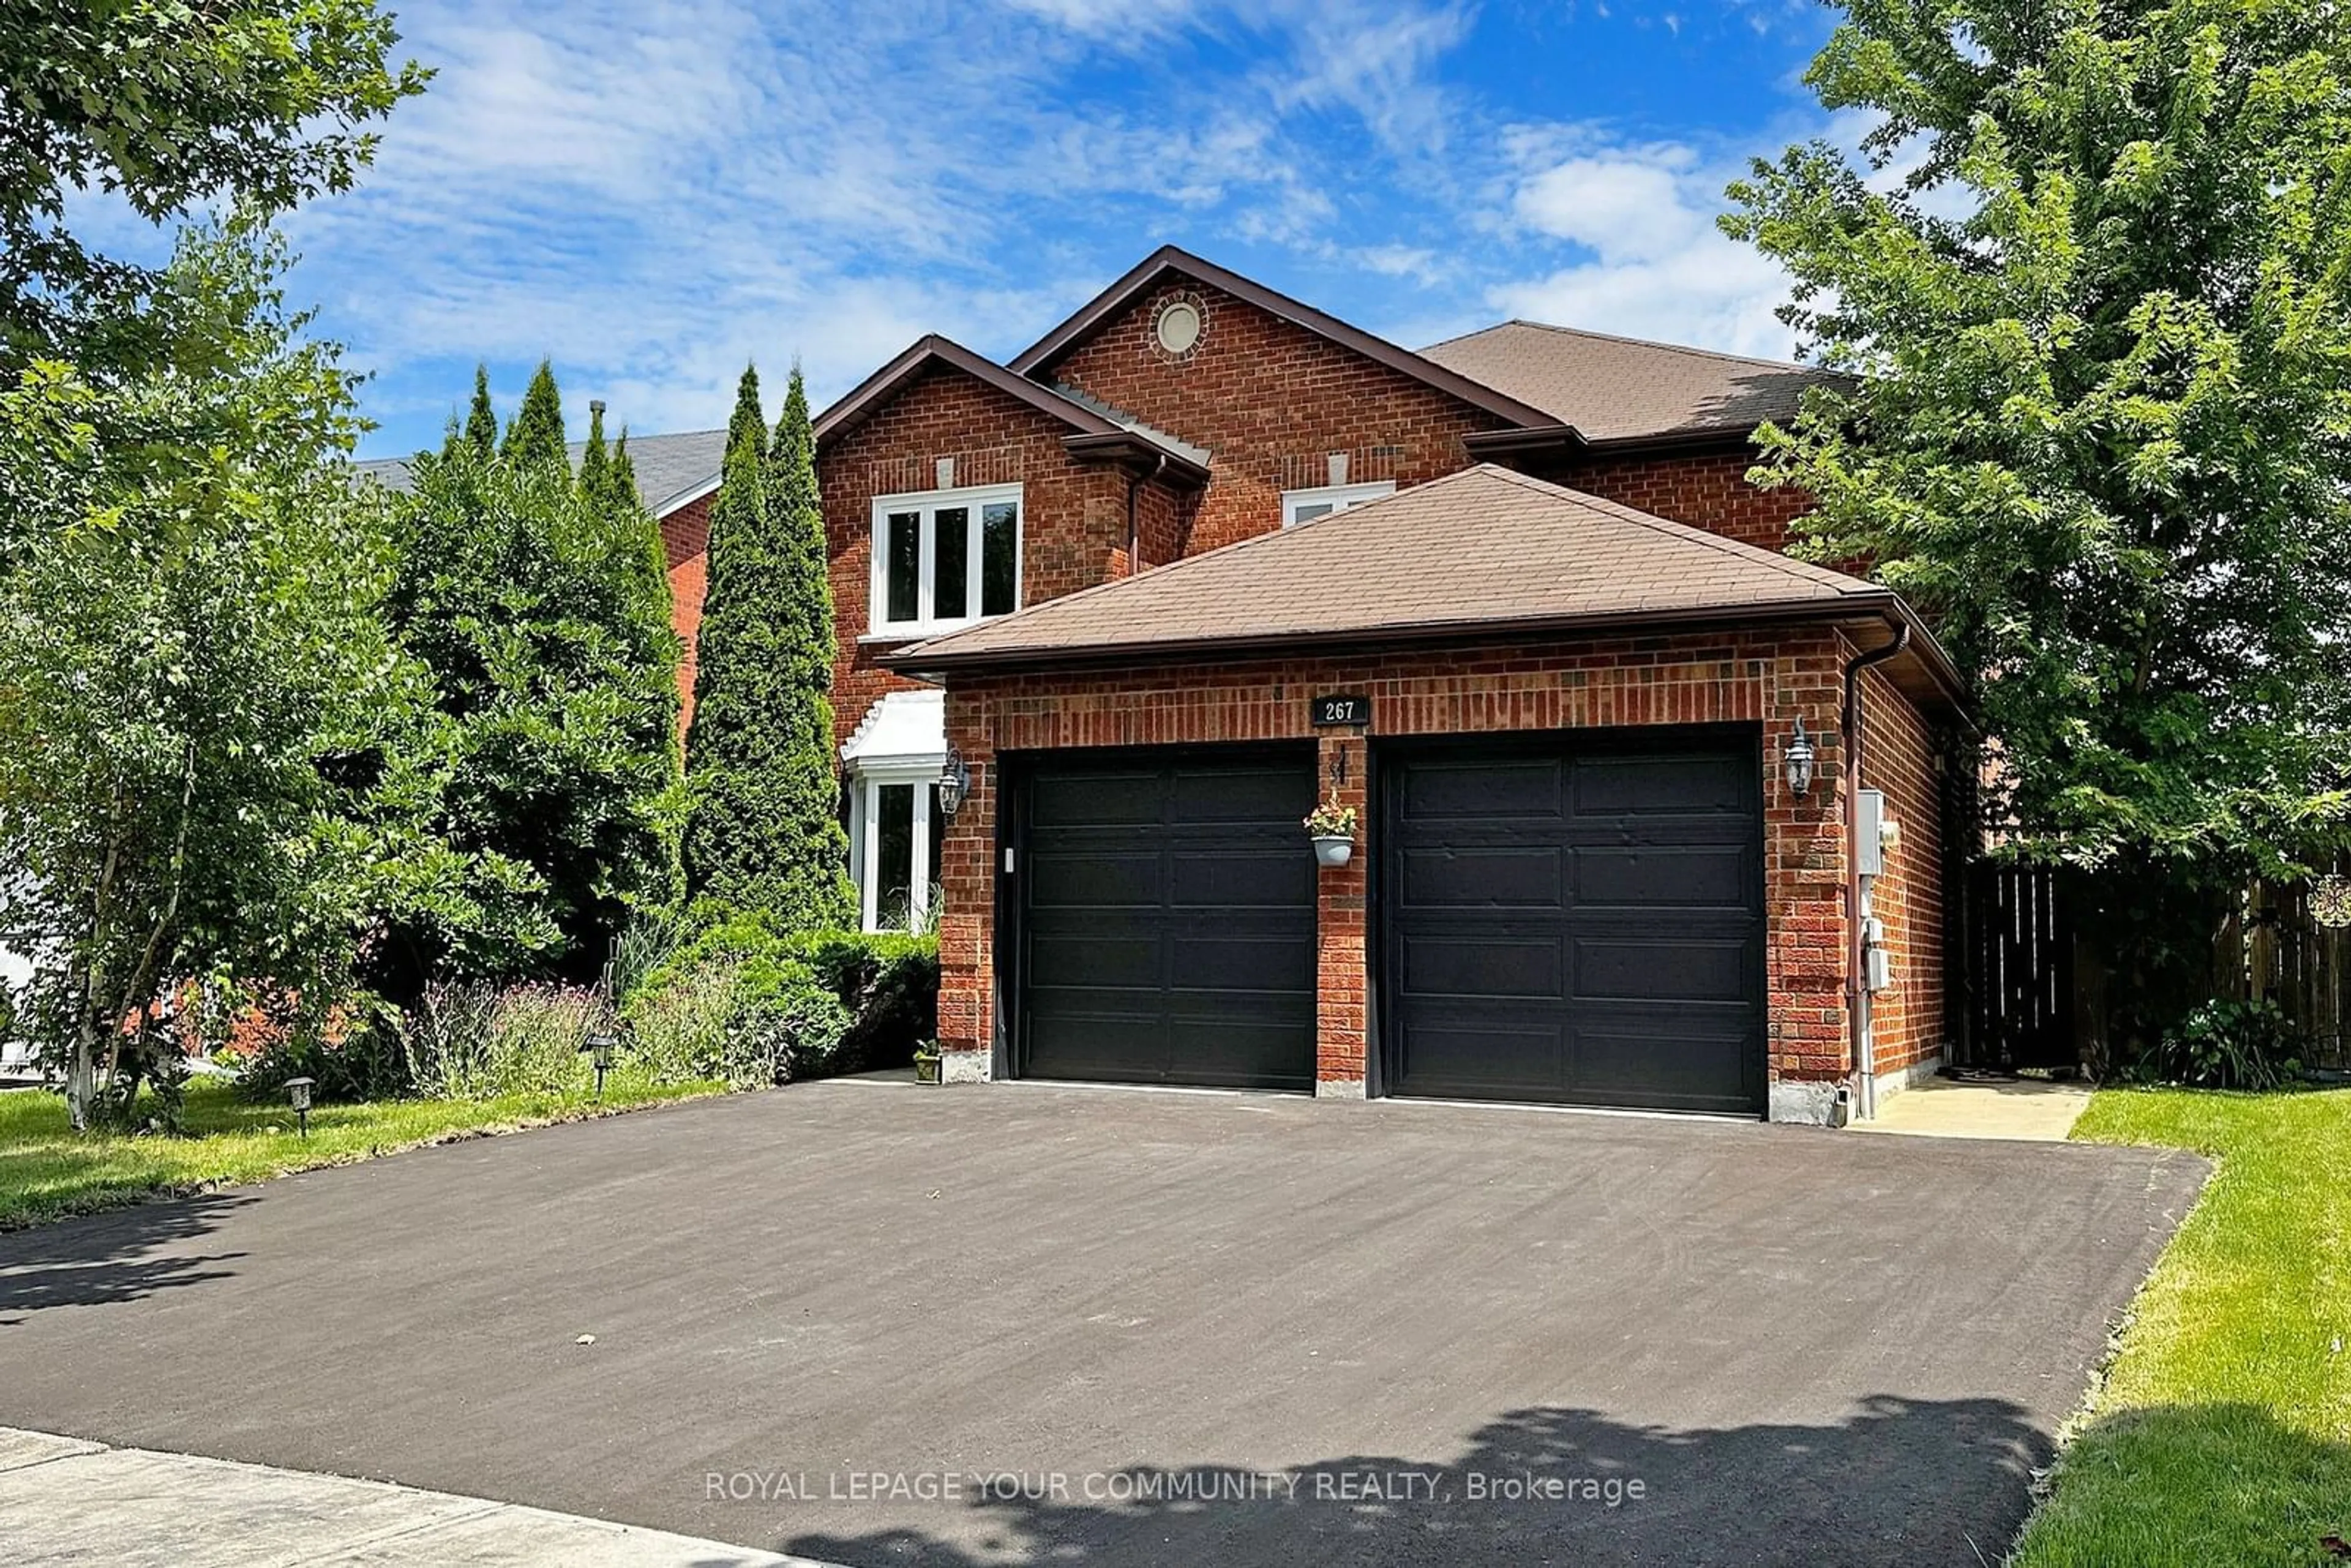 Home with brick exterior material for 267 Savage Rd, Newmarket Ontario L3X 1S1